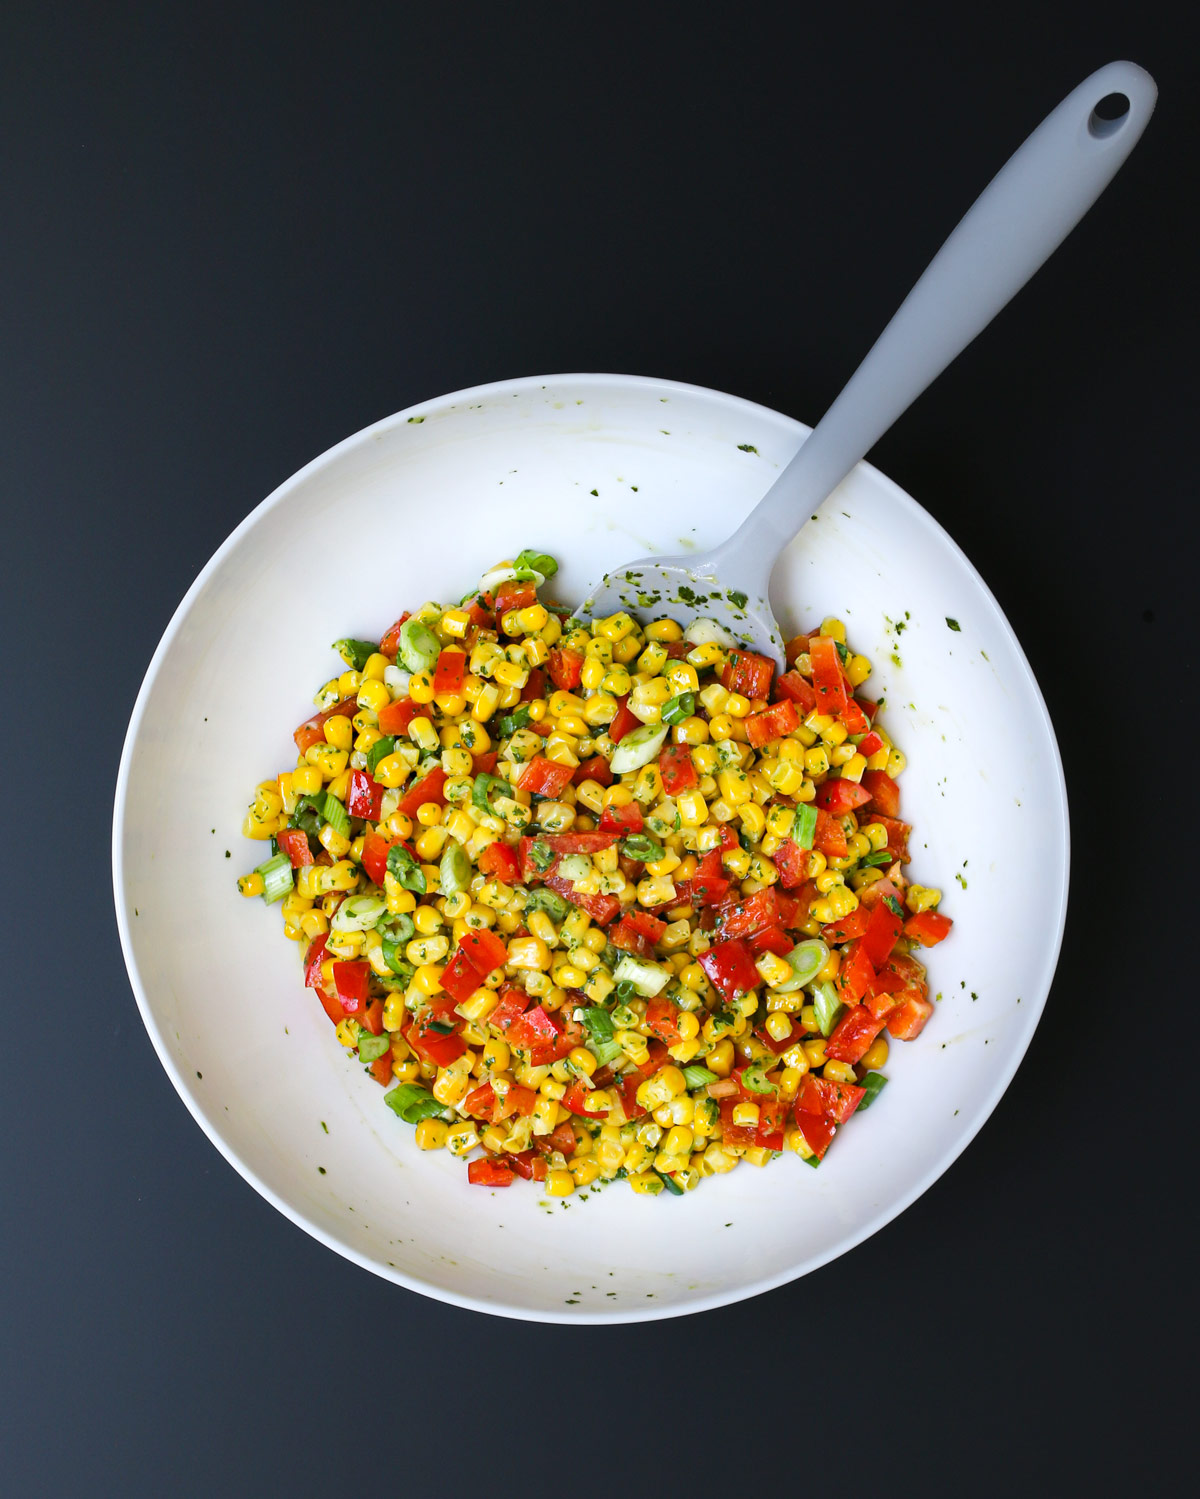 gray spatula submerged in the mixed corn salad in the bowl.